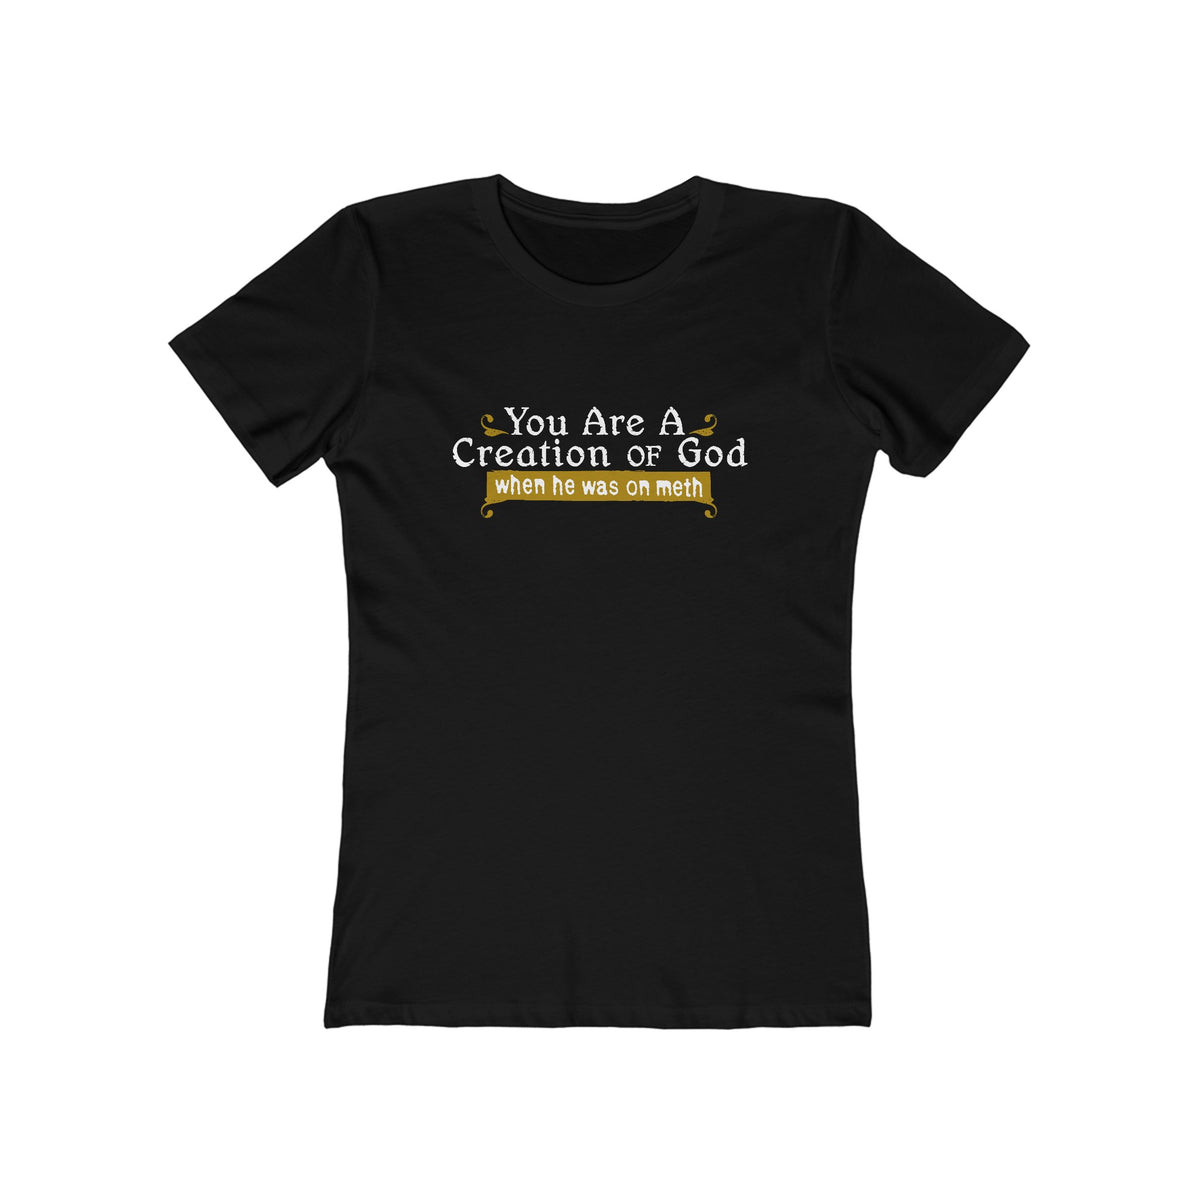 You Are A Creation Of God - When He Was On Meth - Women’s T-Shirt